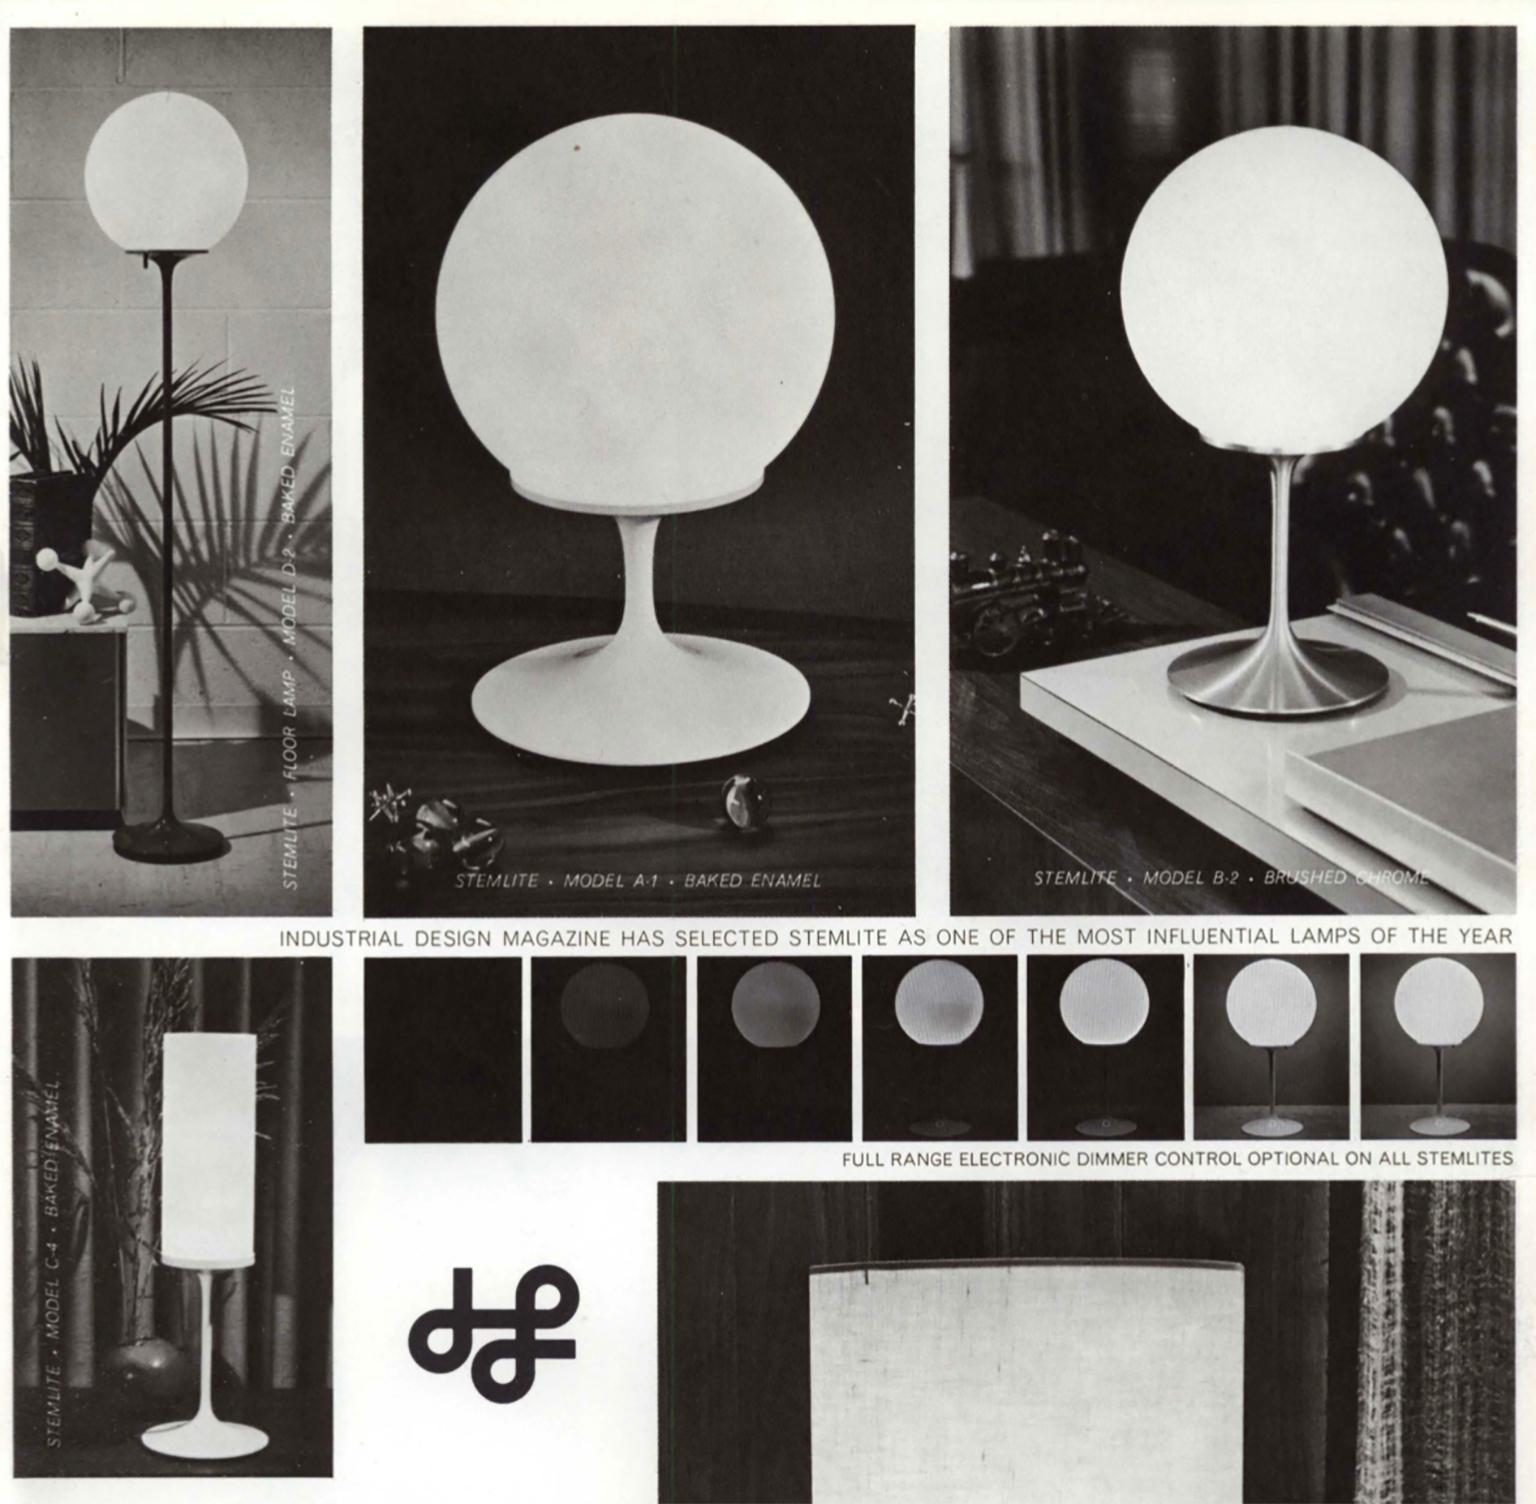 A tulip-based lamp by Bill Curry for his Company, Design Line. Designed and manufactured in El Segundo, CA in the 1960s. This model is the Stemlite A1 and includes the original glass shade and enameled metal base.

Bill Curry's work was selected